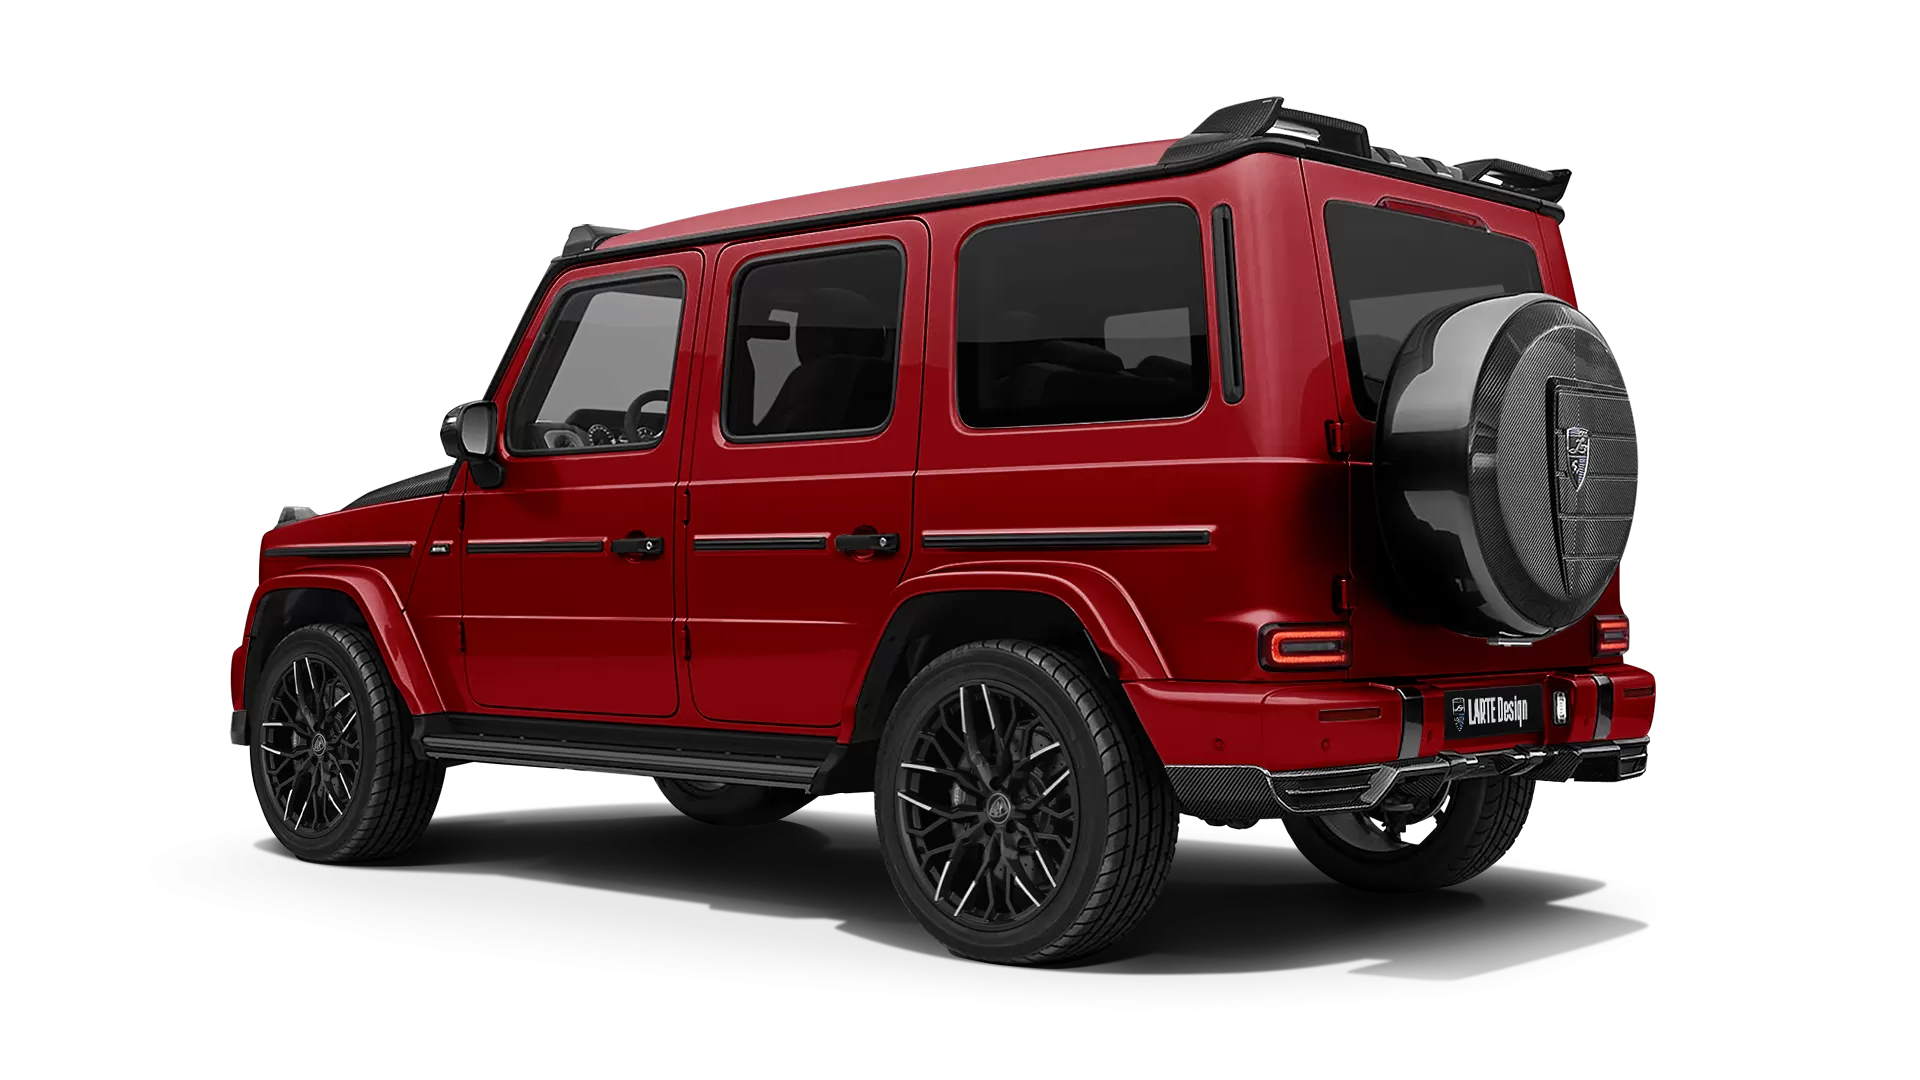 Mercedes G class W463 with carbon body kit: back view shown in Jupiter Red